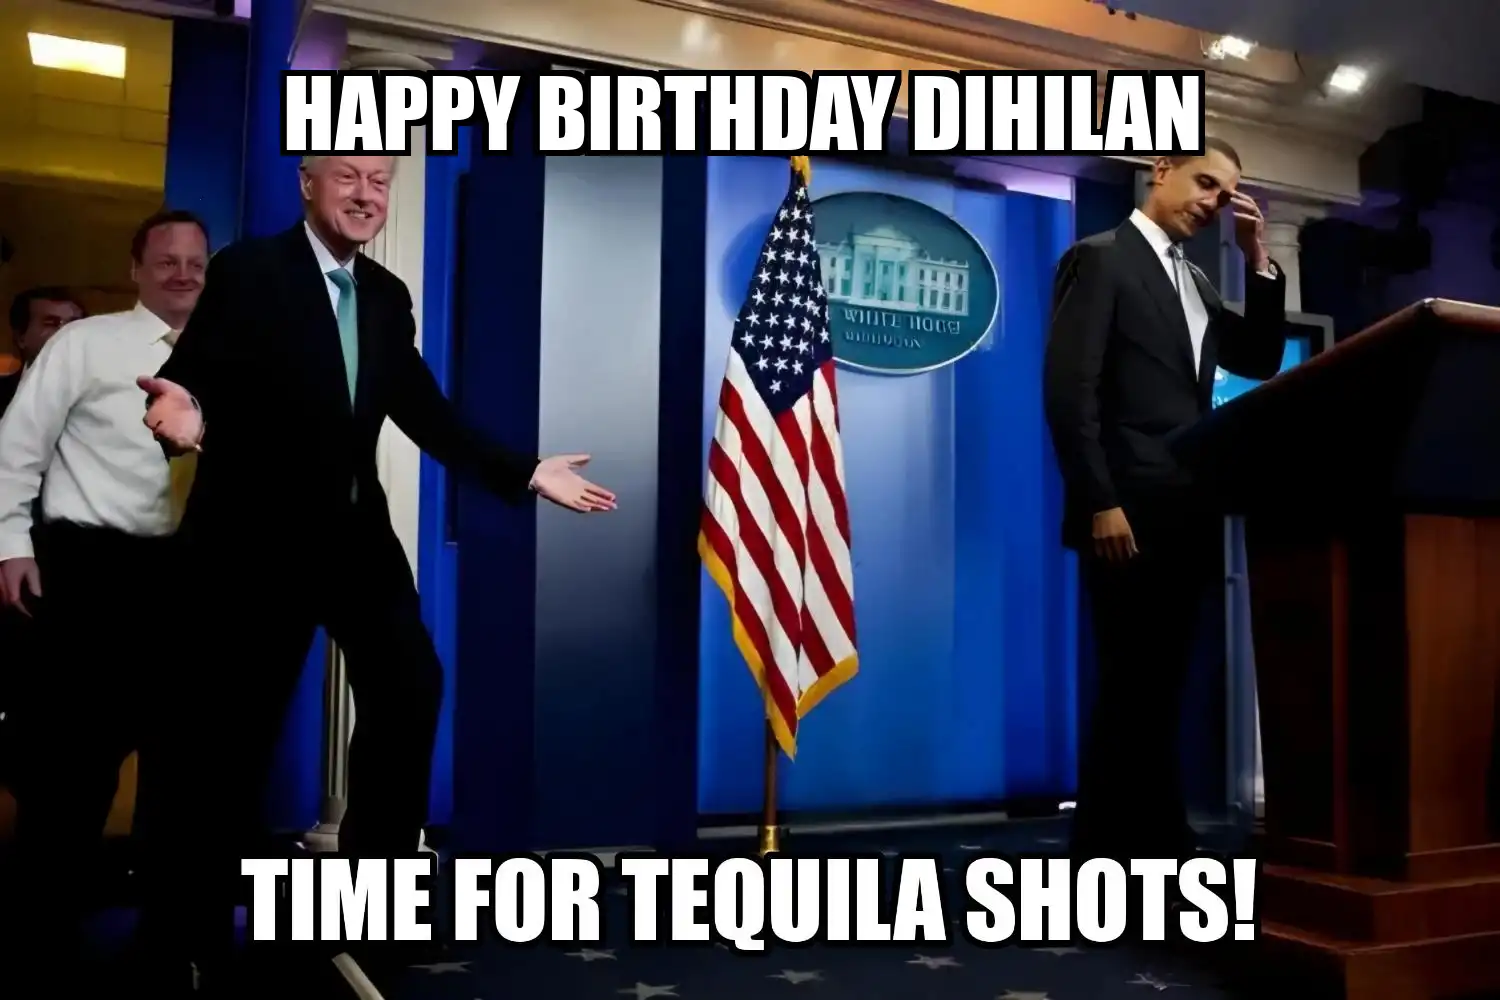 Happy Birthday Dihilan Time For Tequila Shots Memes